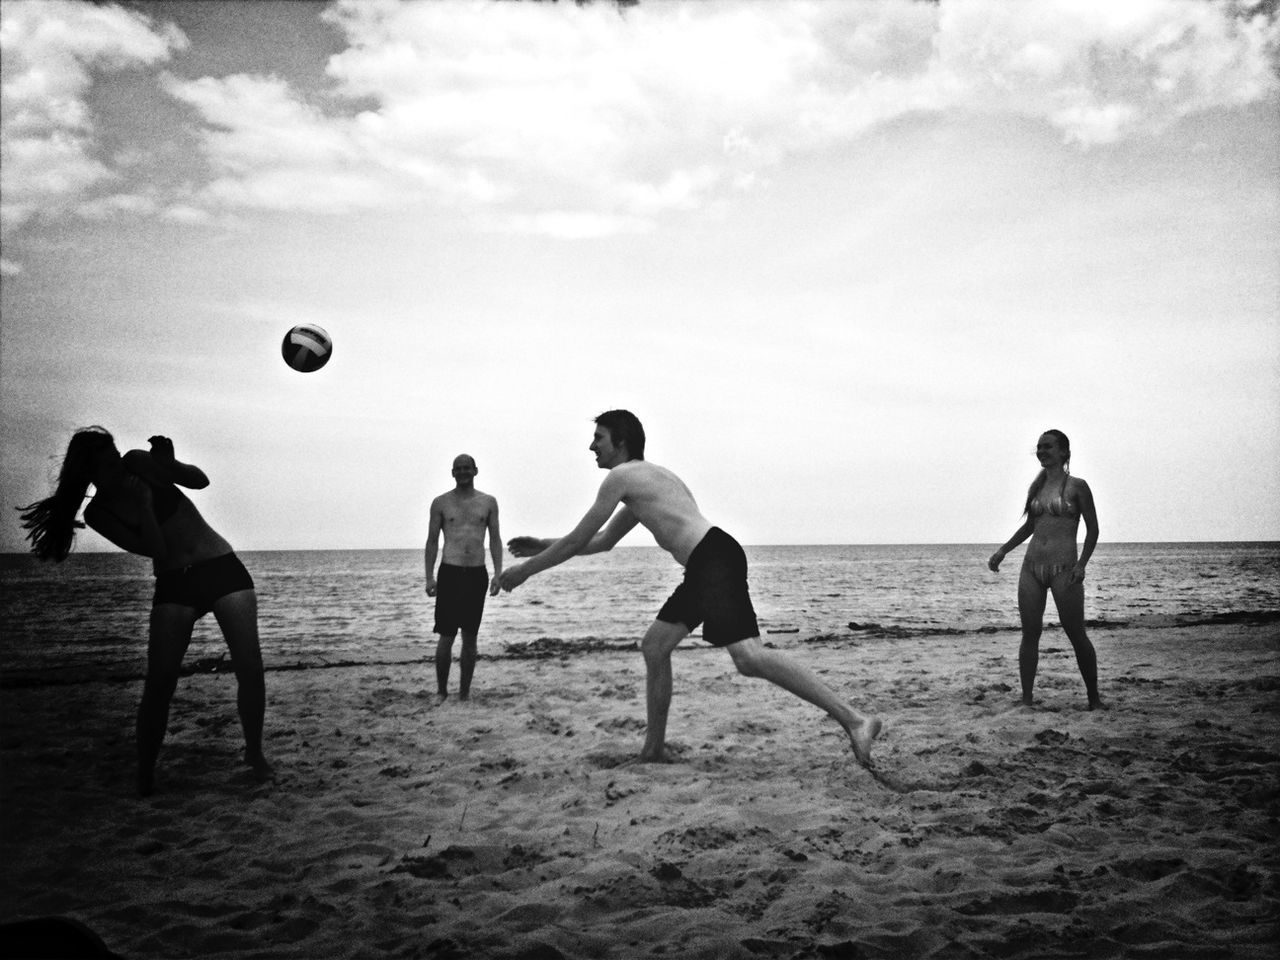 beach, leisure activity, lifestyles, sand, sky, full length, childhood, boys, mid-air, fun, men, enjoyment, shore, vacations, playing, sport, flying, cloud - sky, togetherness